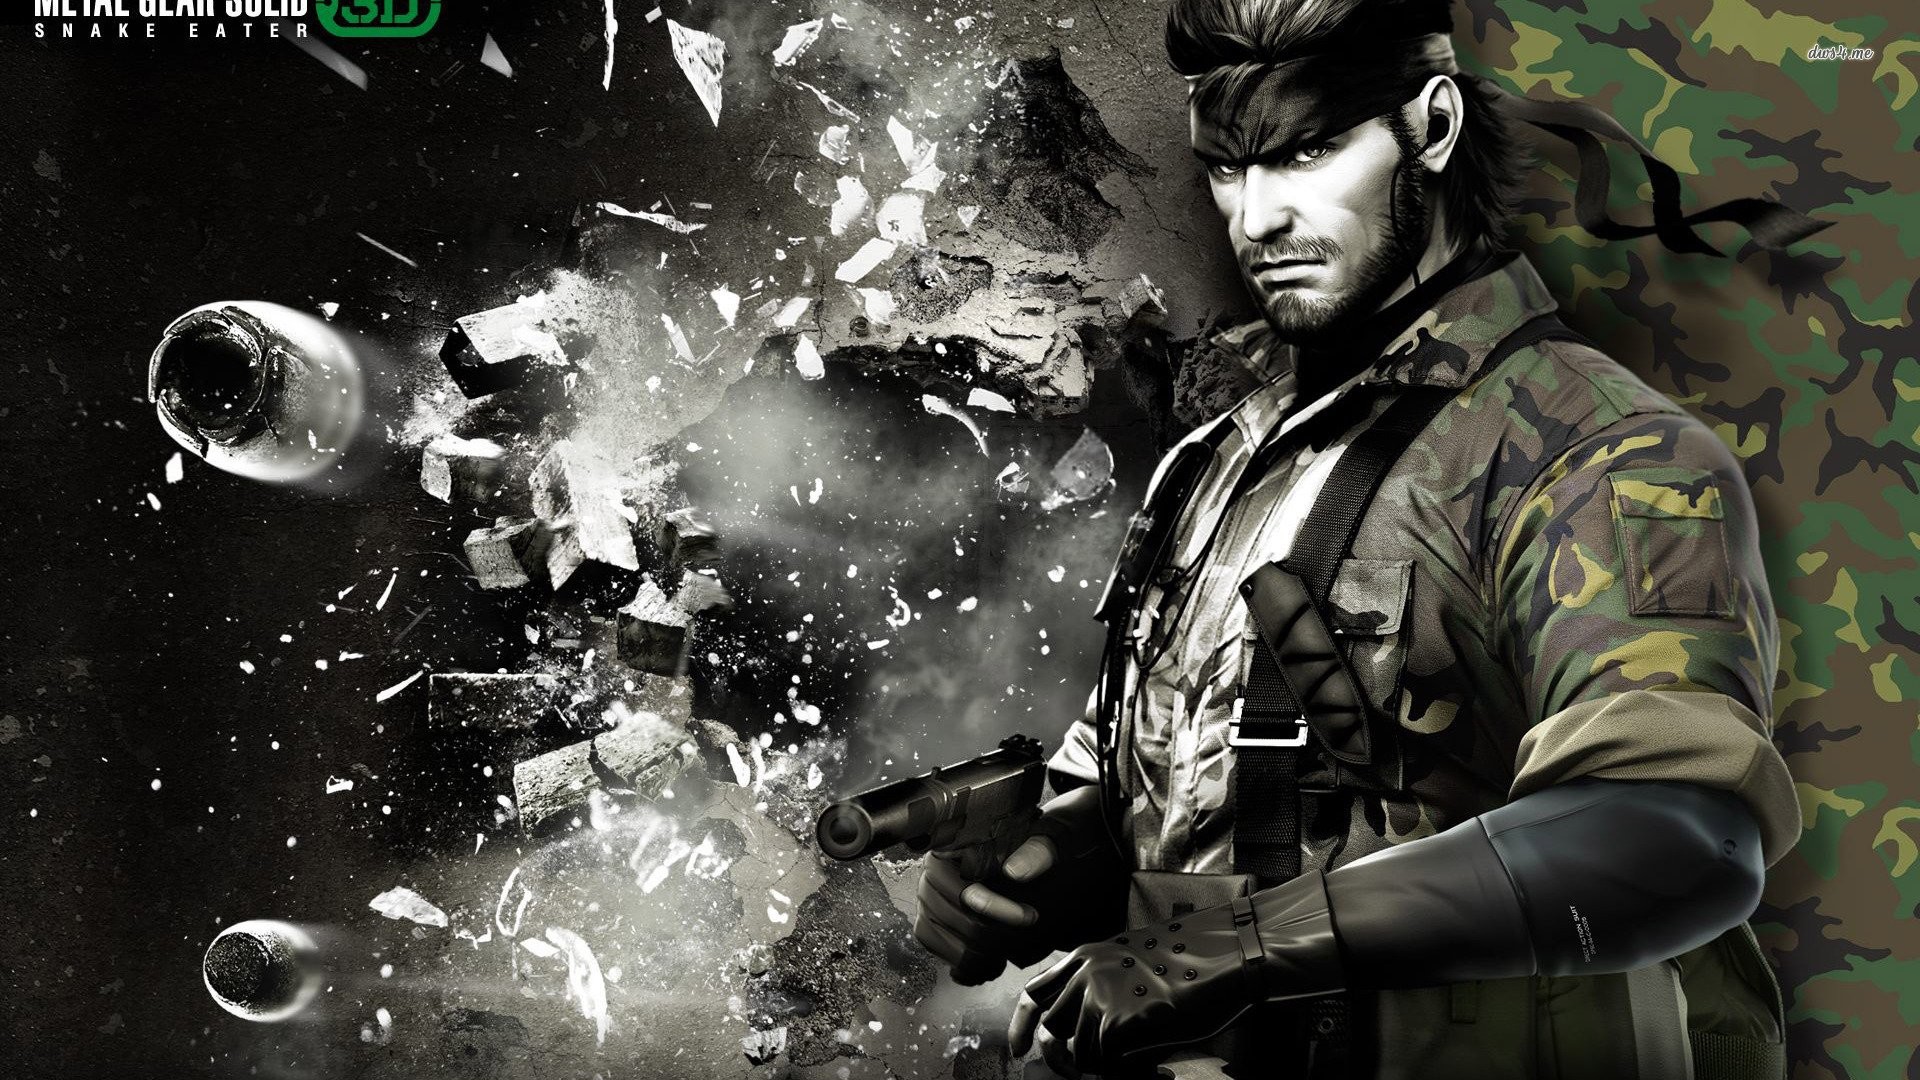 1920x1080 Metal Gear Solid 3: Snake Eater HD Wallpapers